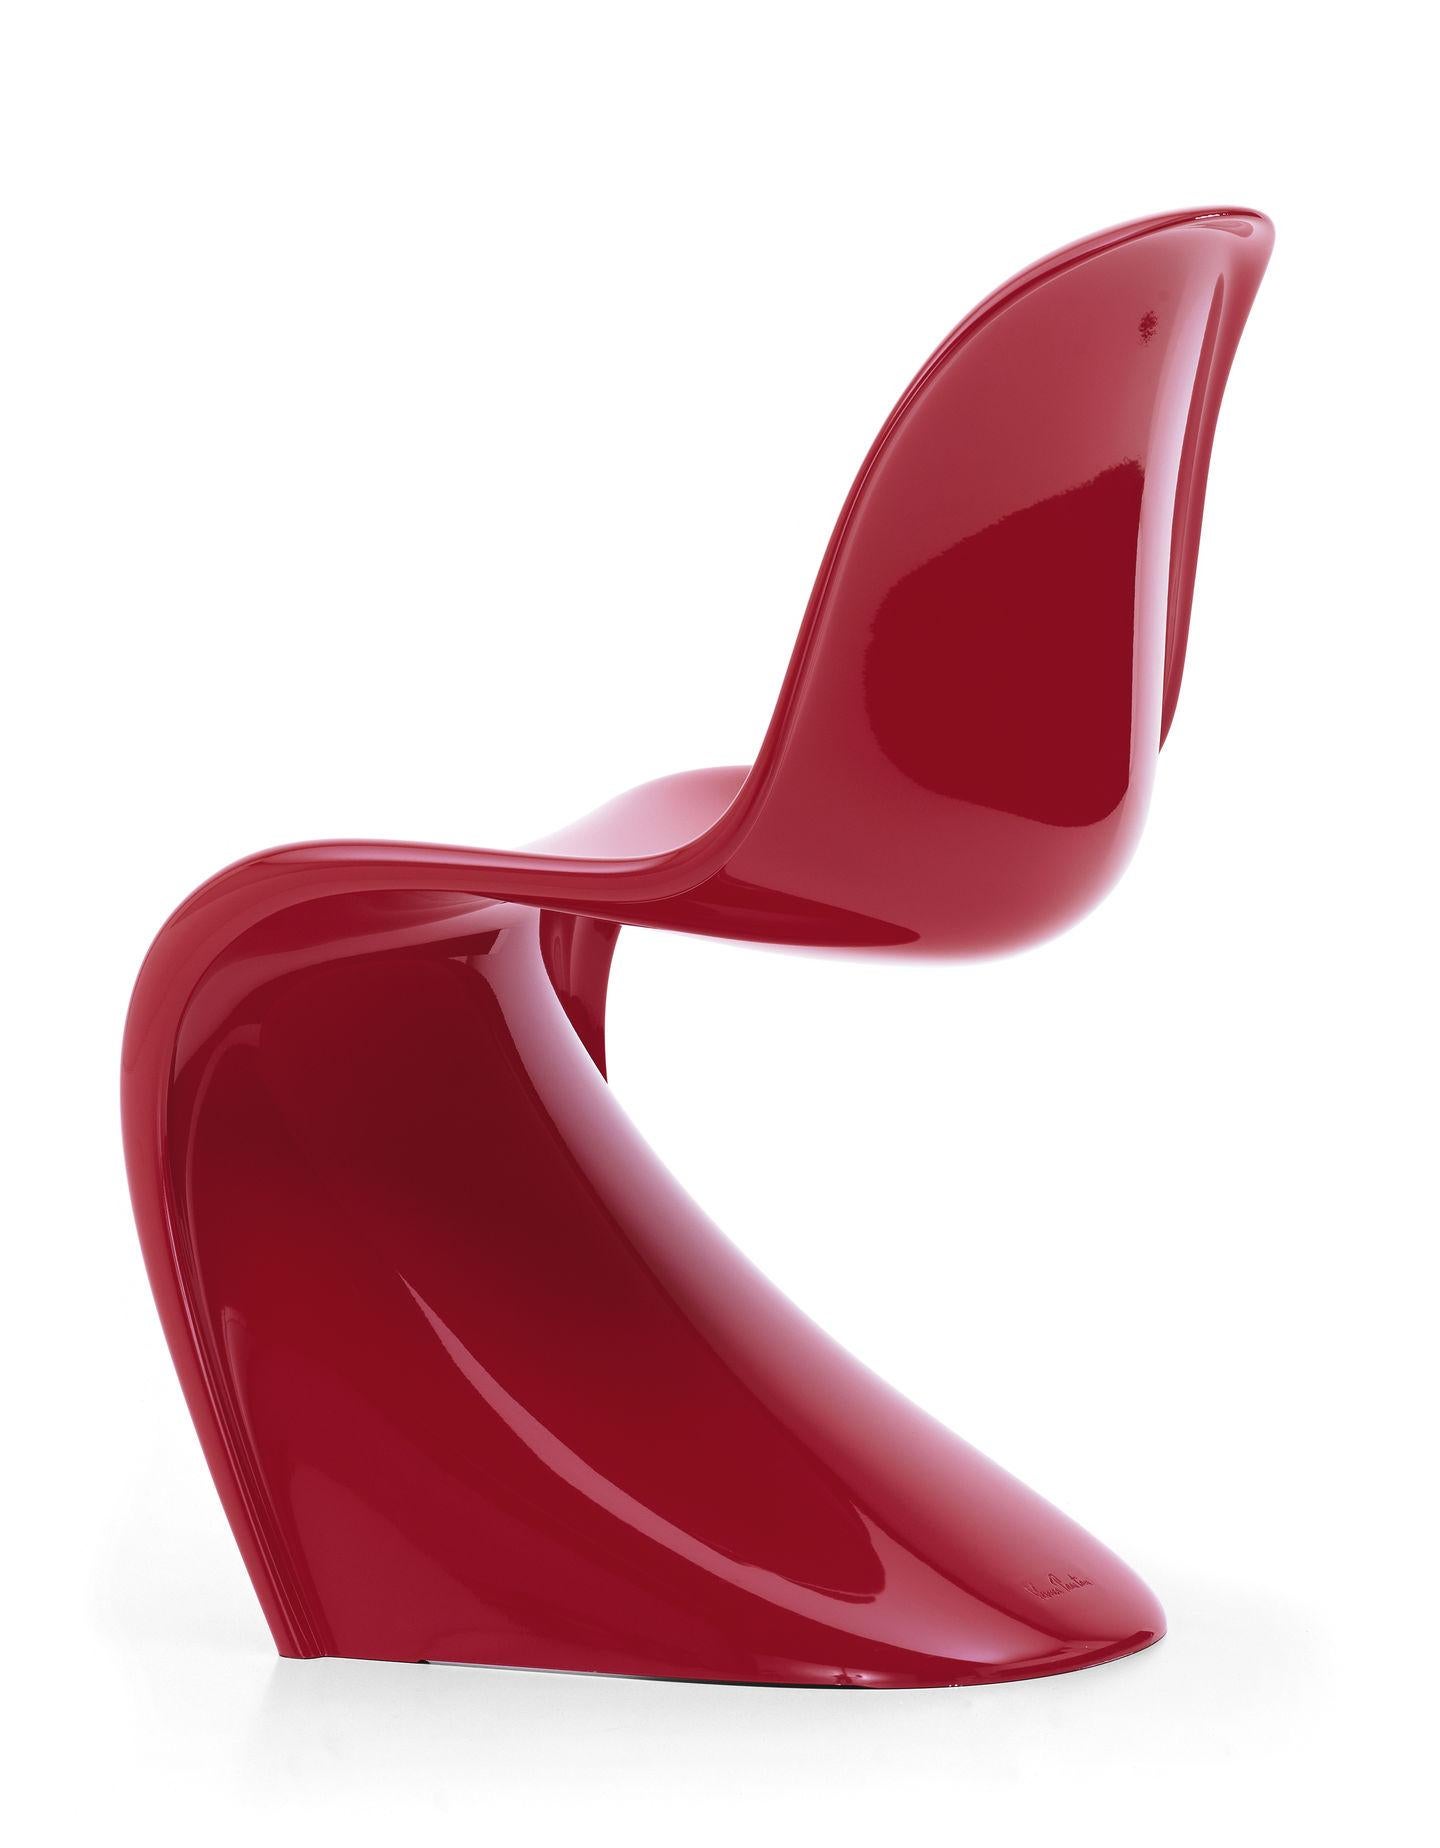 Swiss Panton Chair Classic Designed by Verner Panton and Manufactured by Vitra